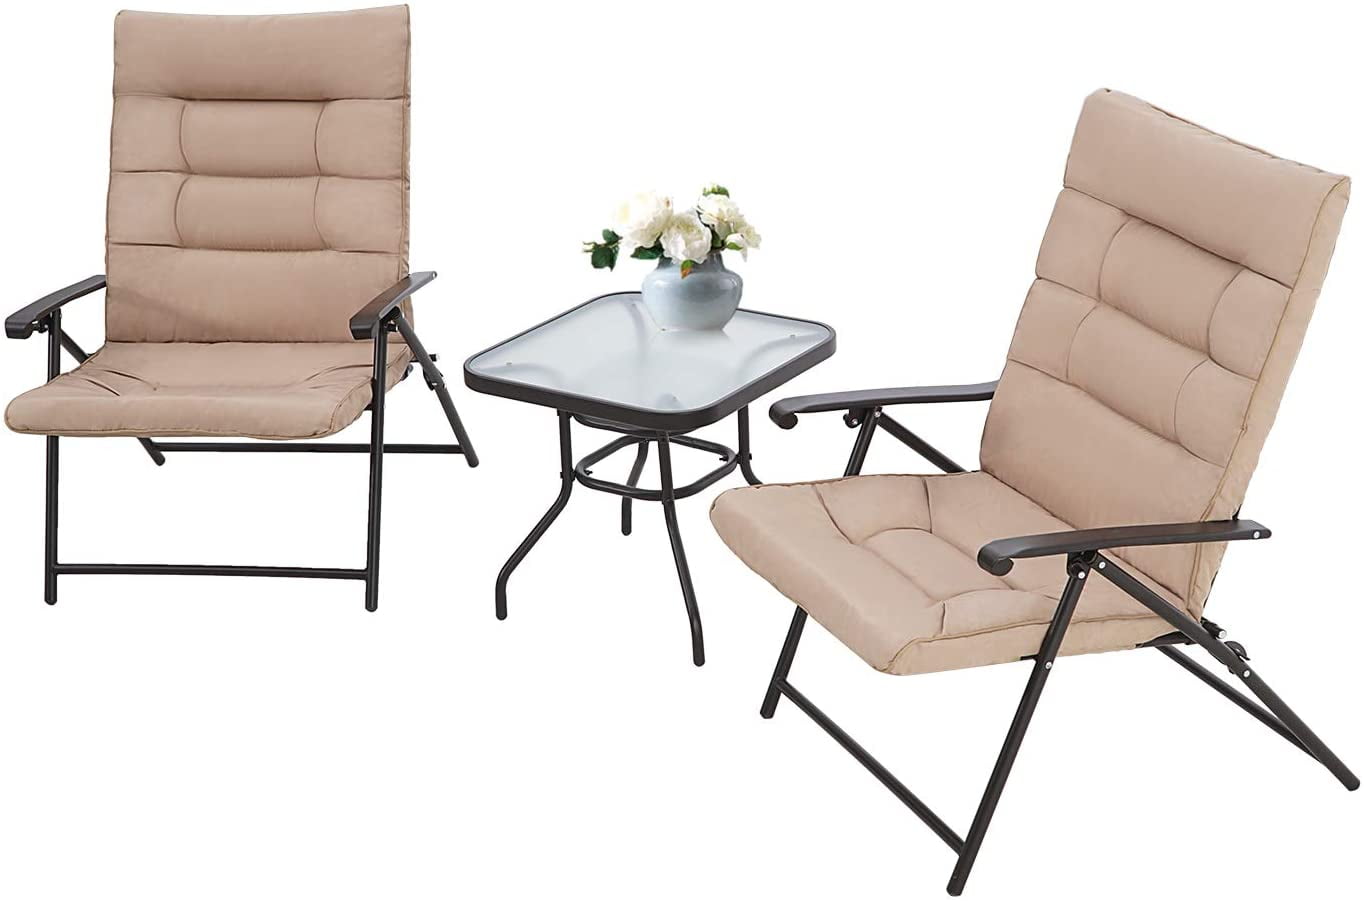 SOLAURA Patio Furniture 3 Piece Folding Chair Adjustable Reclining Lounge Chair Metal Frame w/Glass-Top Coffee Table 2 Chairs and 1 Table 